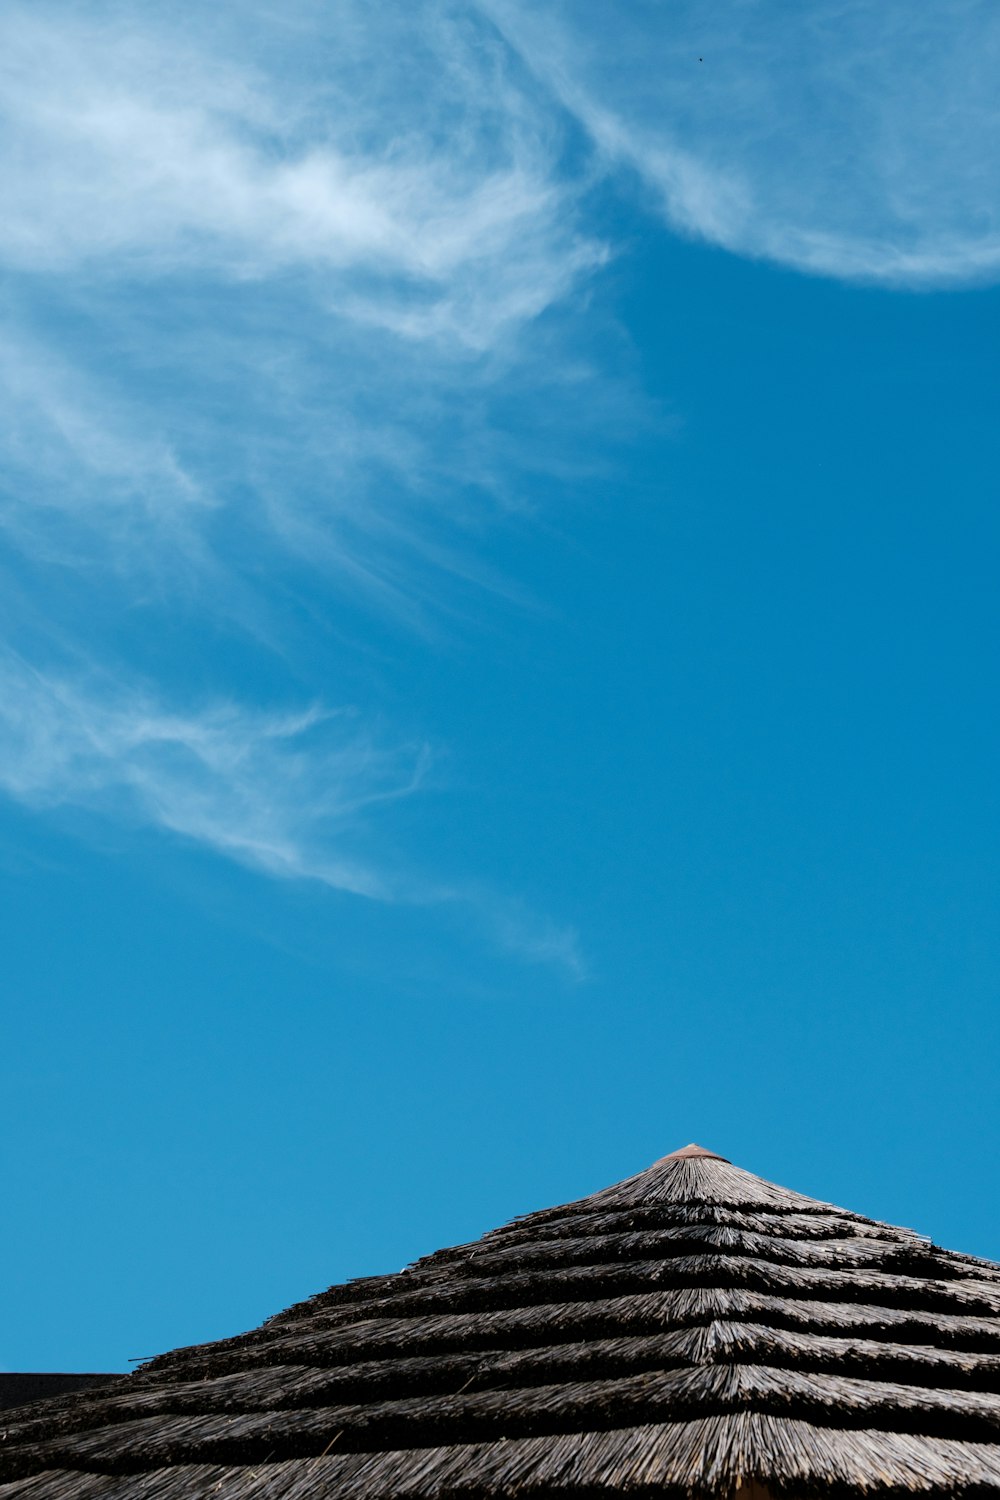 a thatched roof with a blue sky in the background